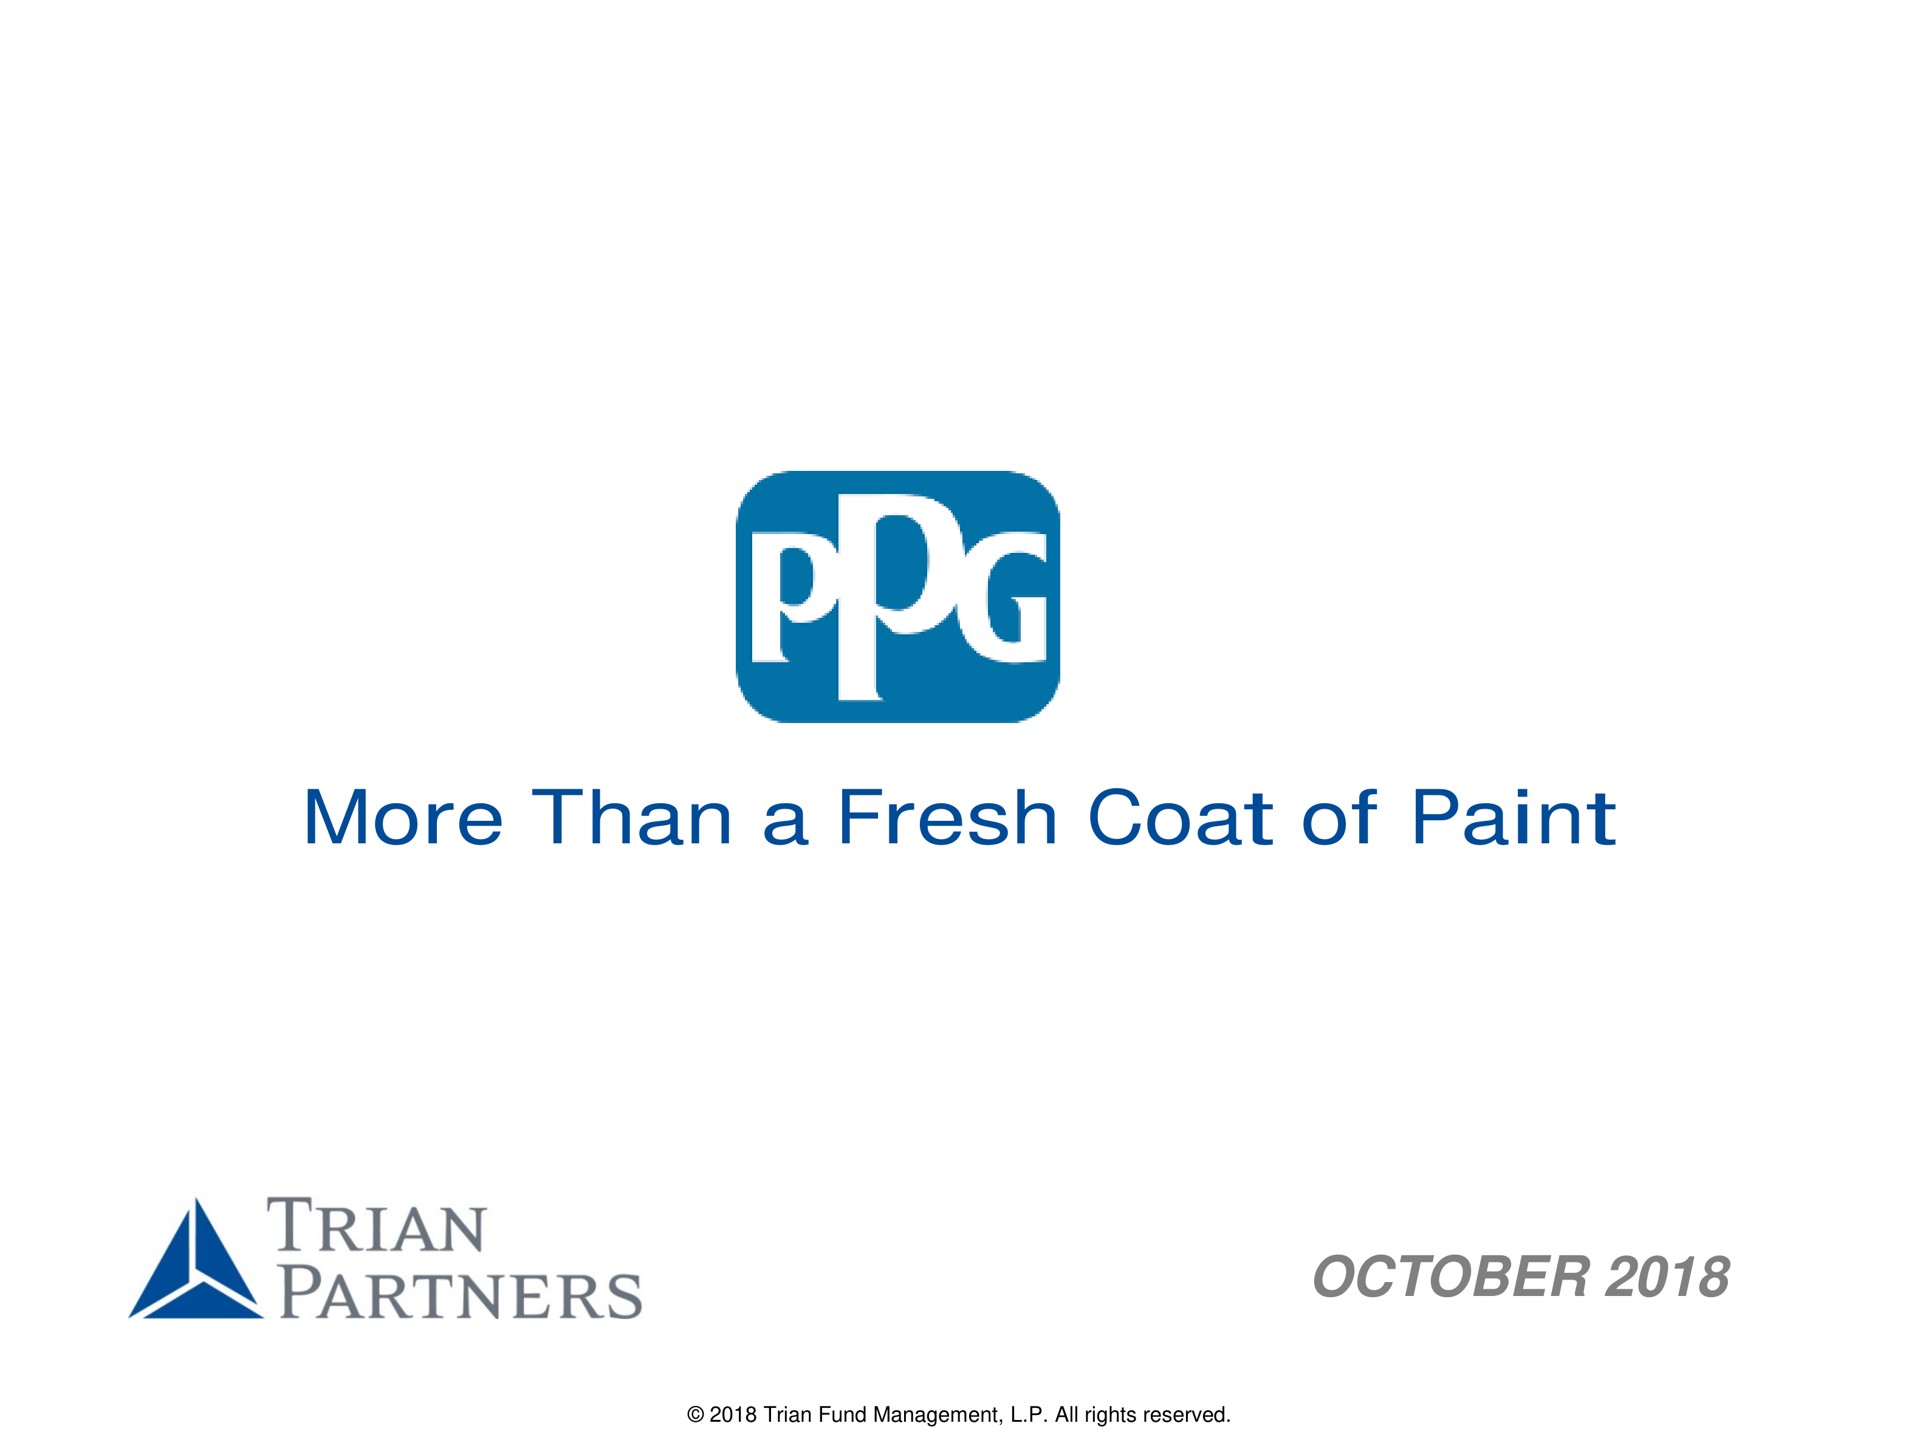 more than a fresh coat of paint san partners | Trian Partners